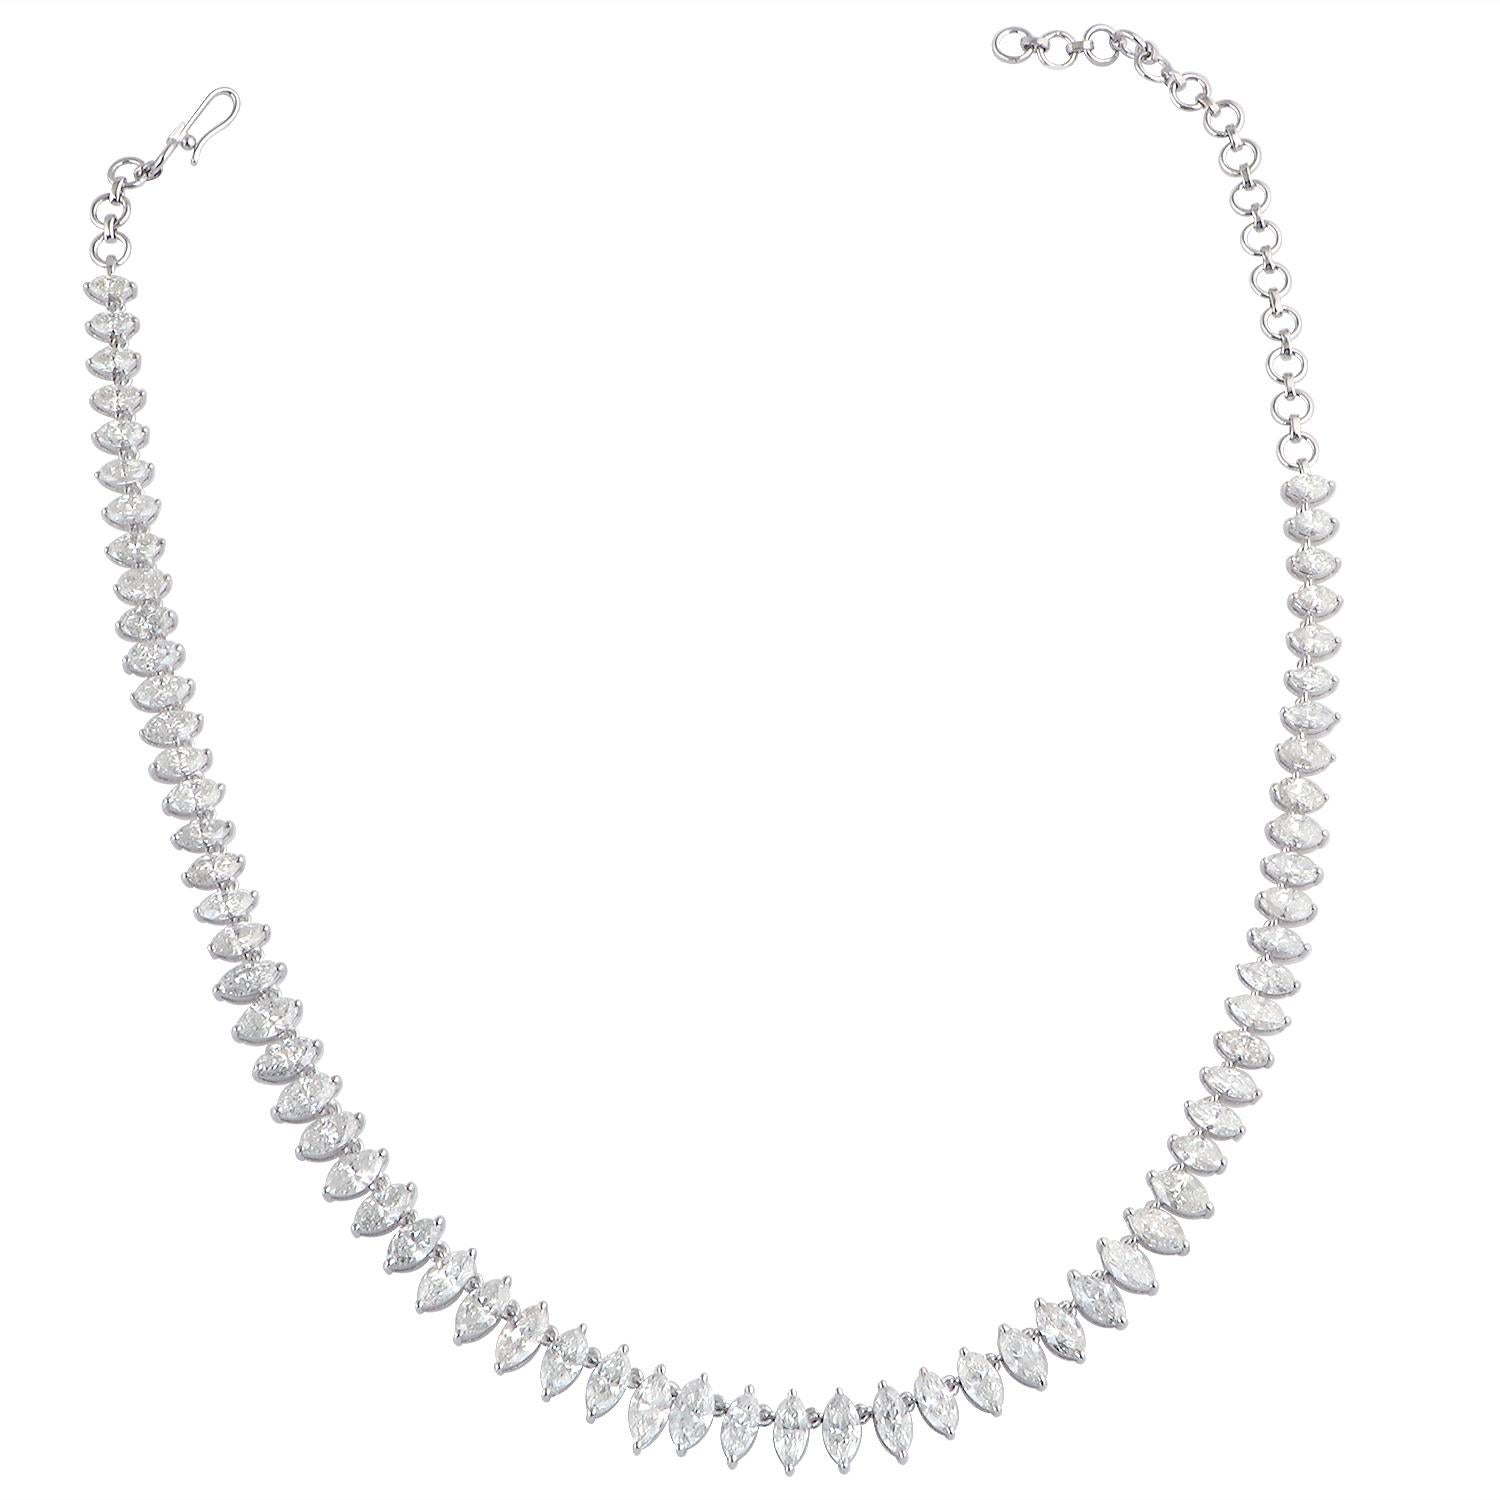 The necklace is designed to be worn as a charm necklace, with each diamond charm hanging gracefully from the chain. This design allows for movement and adds an element of playfulness to the piece. The adjustable chain length ensures a perfect fit,